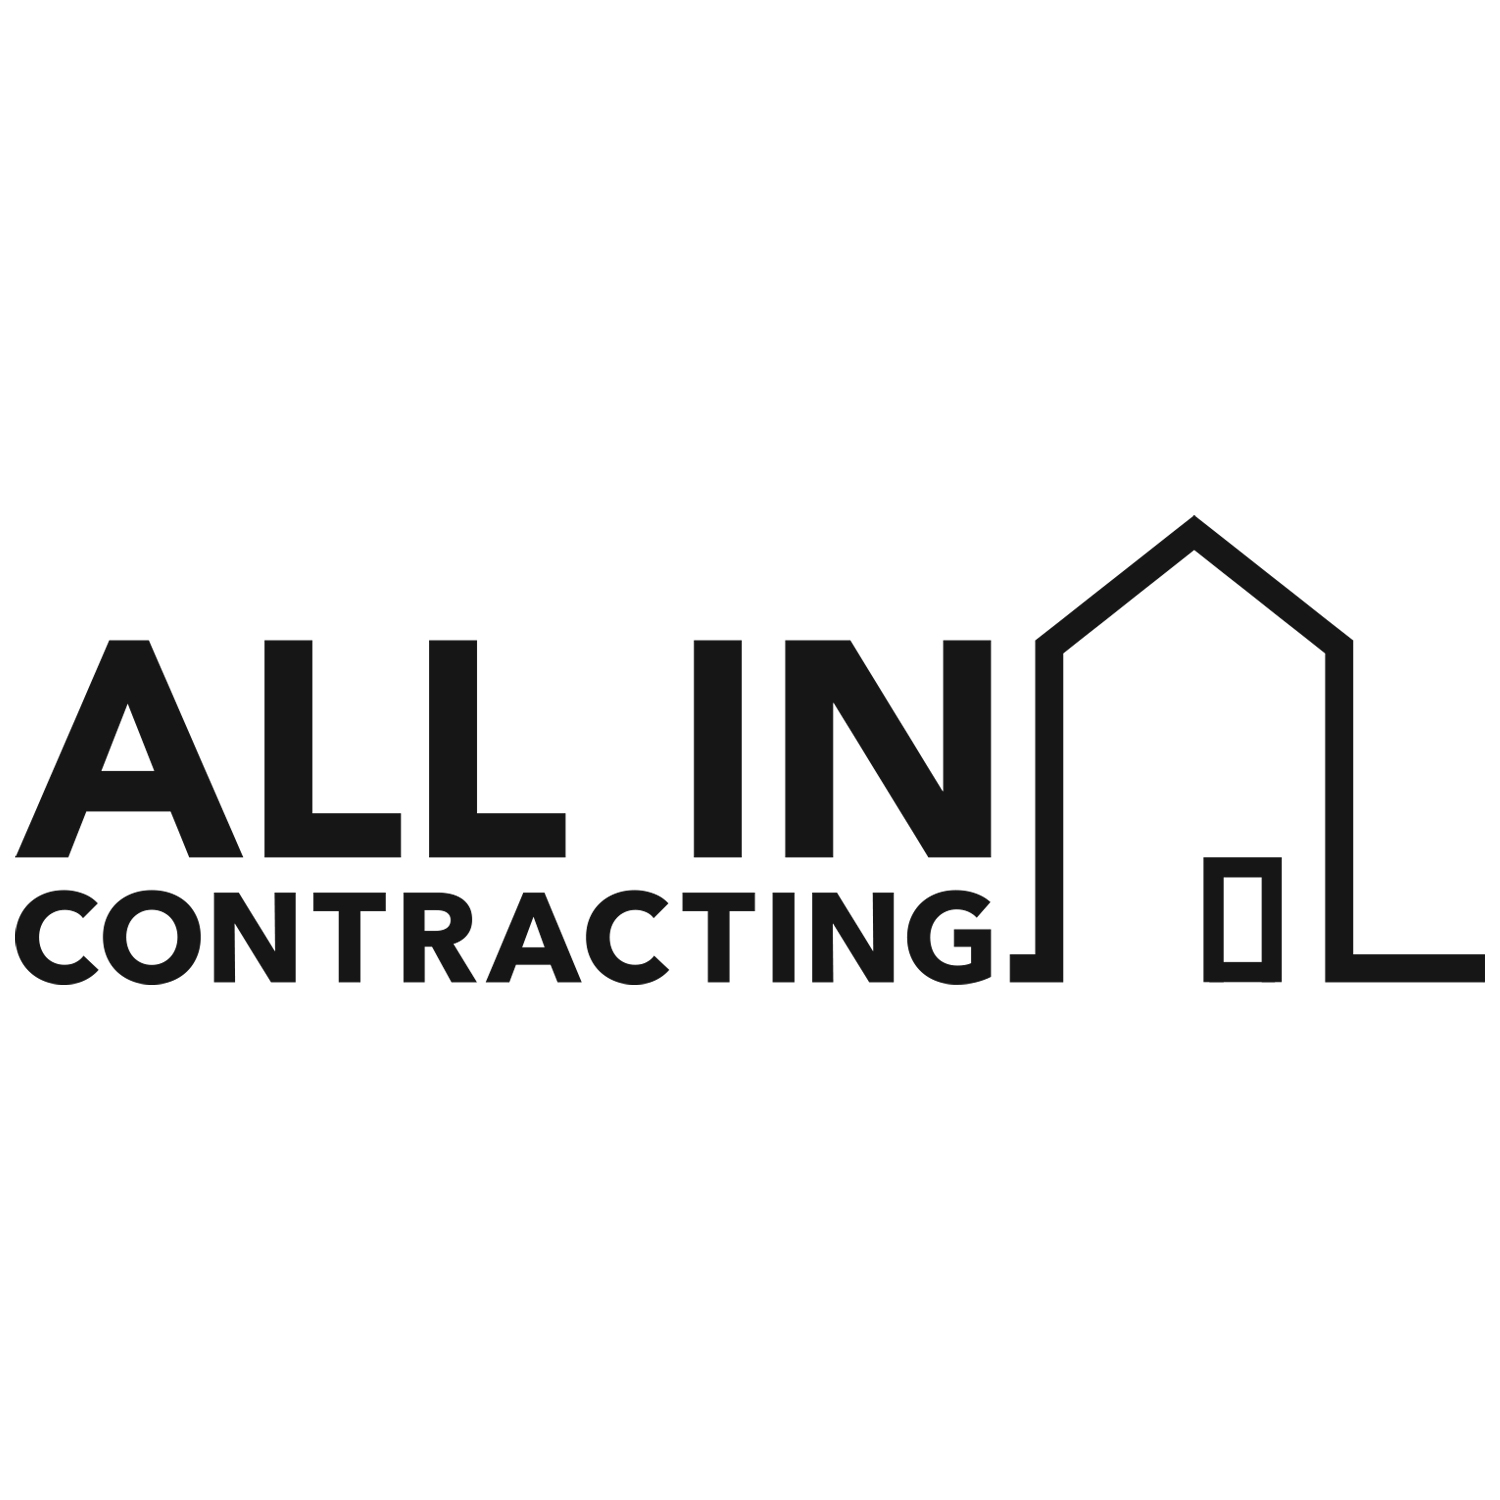 All In Contracting